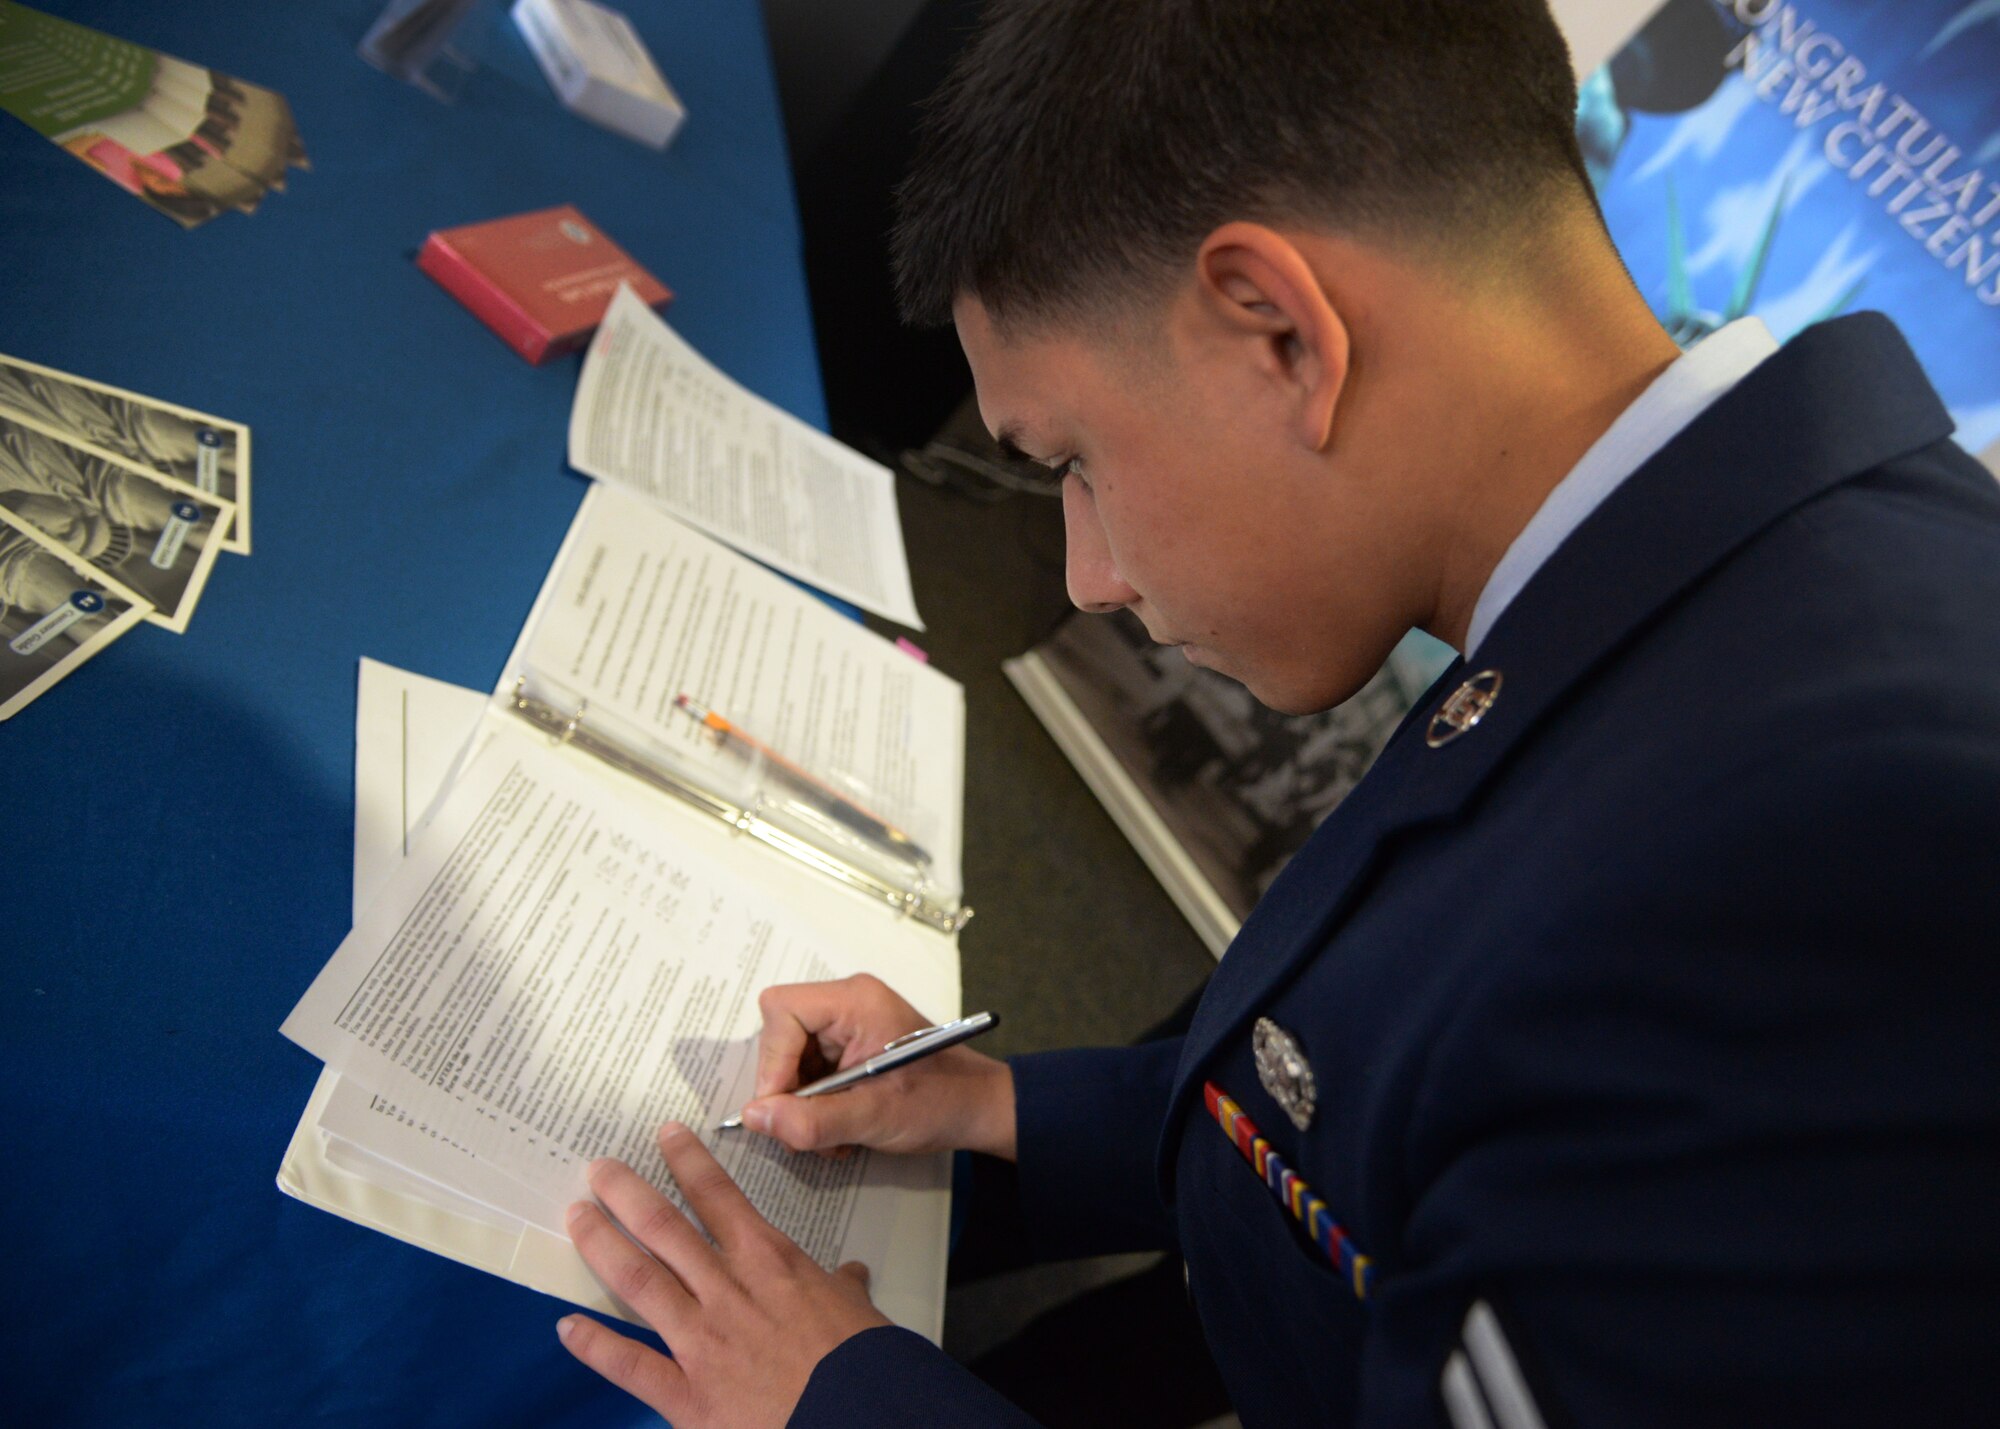 U.S. Air Force Airman 1st Class Dominik Green, 27th Special Operations Logistics Readiness Squadron storage and issue specialist, signs official documents prior to a naturalization ceremony March 20, 2015 at Cannon Air Force Base, N.M. Green was born in Mannheim, Germany and was one of four presented with their citizenship by officials from the United States Citizenship and Immigration Services field office in Albuquerque, New Mexico. (U.S. Air Force photo/Staff Sgt. Alex Mercer) 